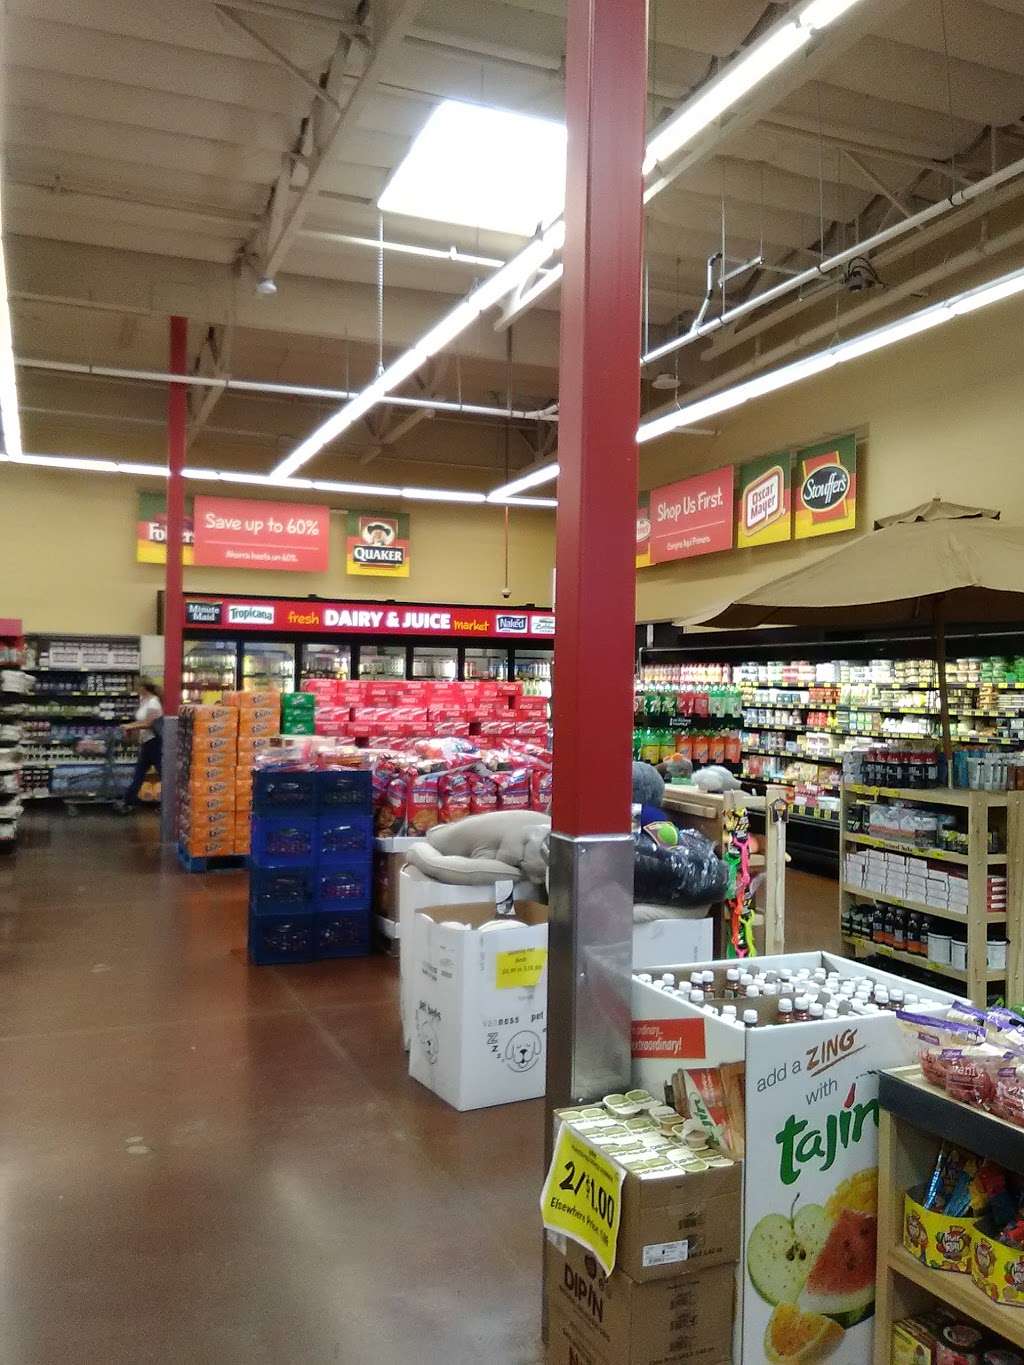 Grocery Outlet Bargain Market | 355 N Citrus Ave, Azusa, CA 91702, USA | Phone: (626) 334-6355